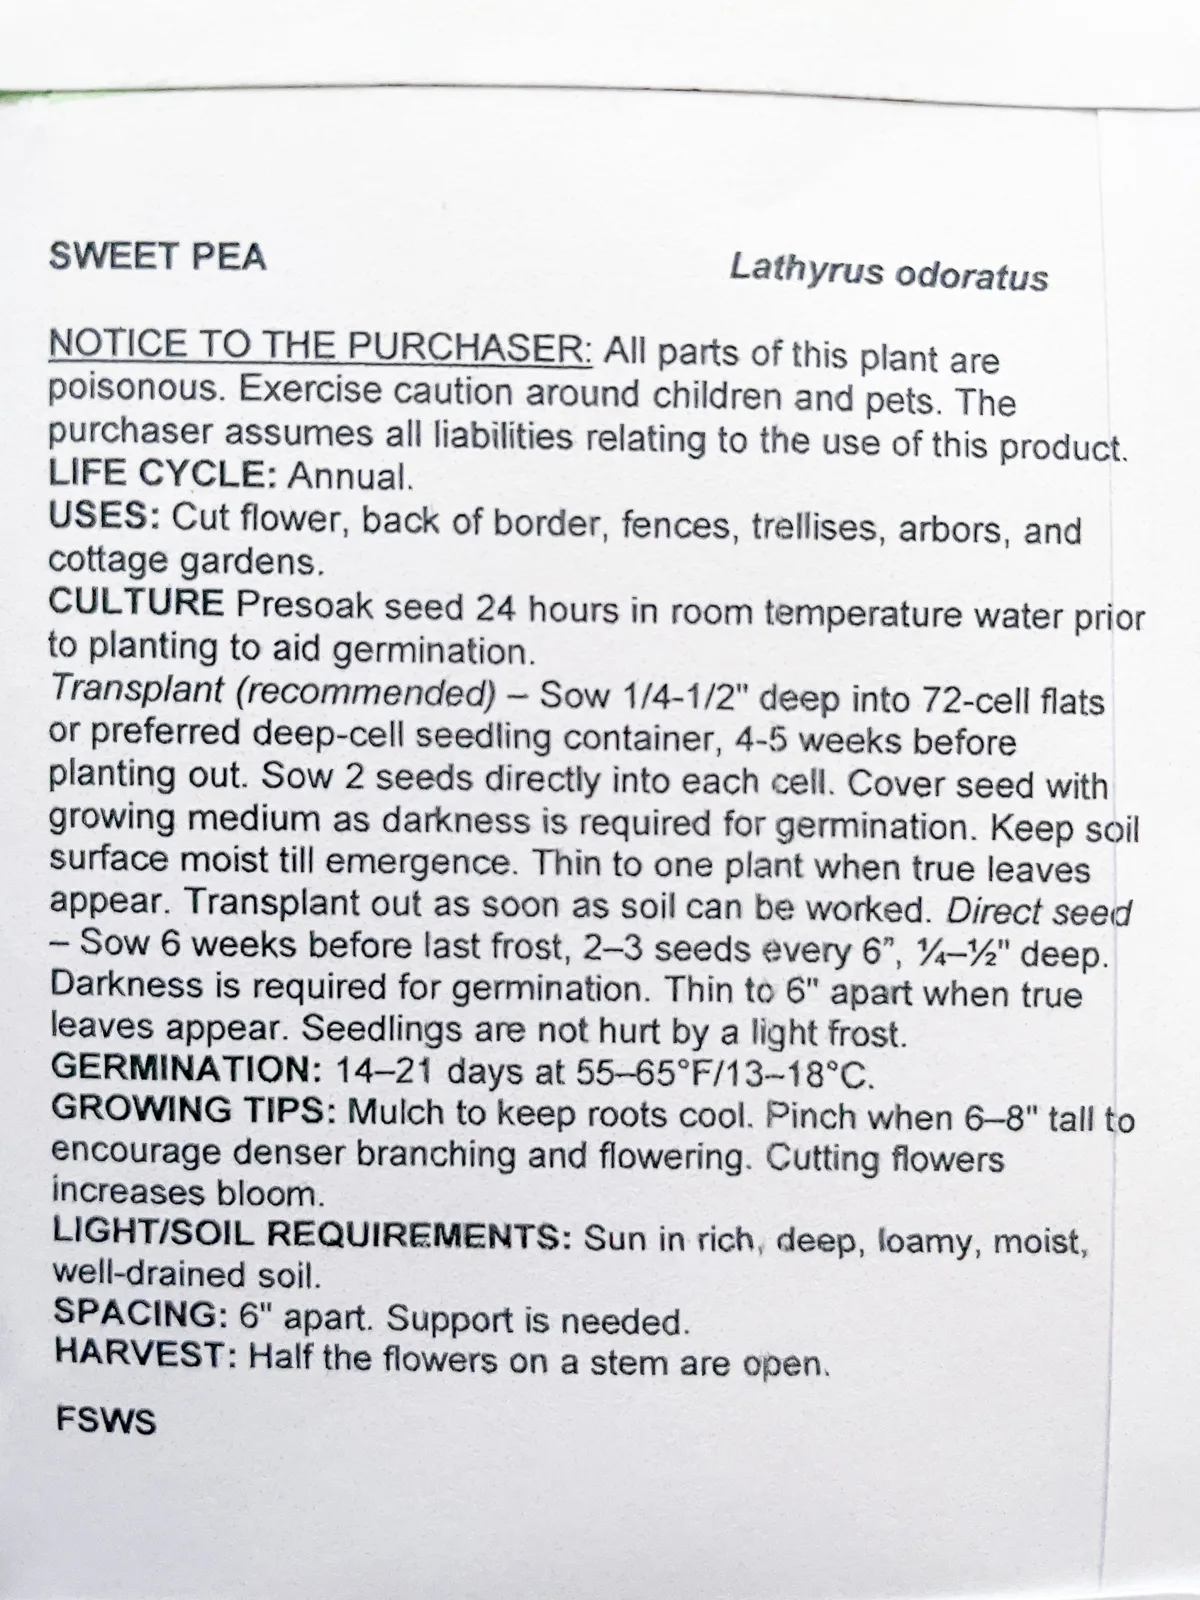 sweet pea seed packet planting instructions